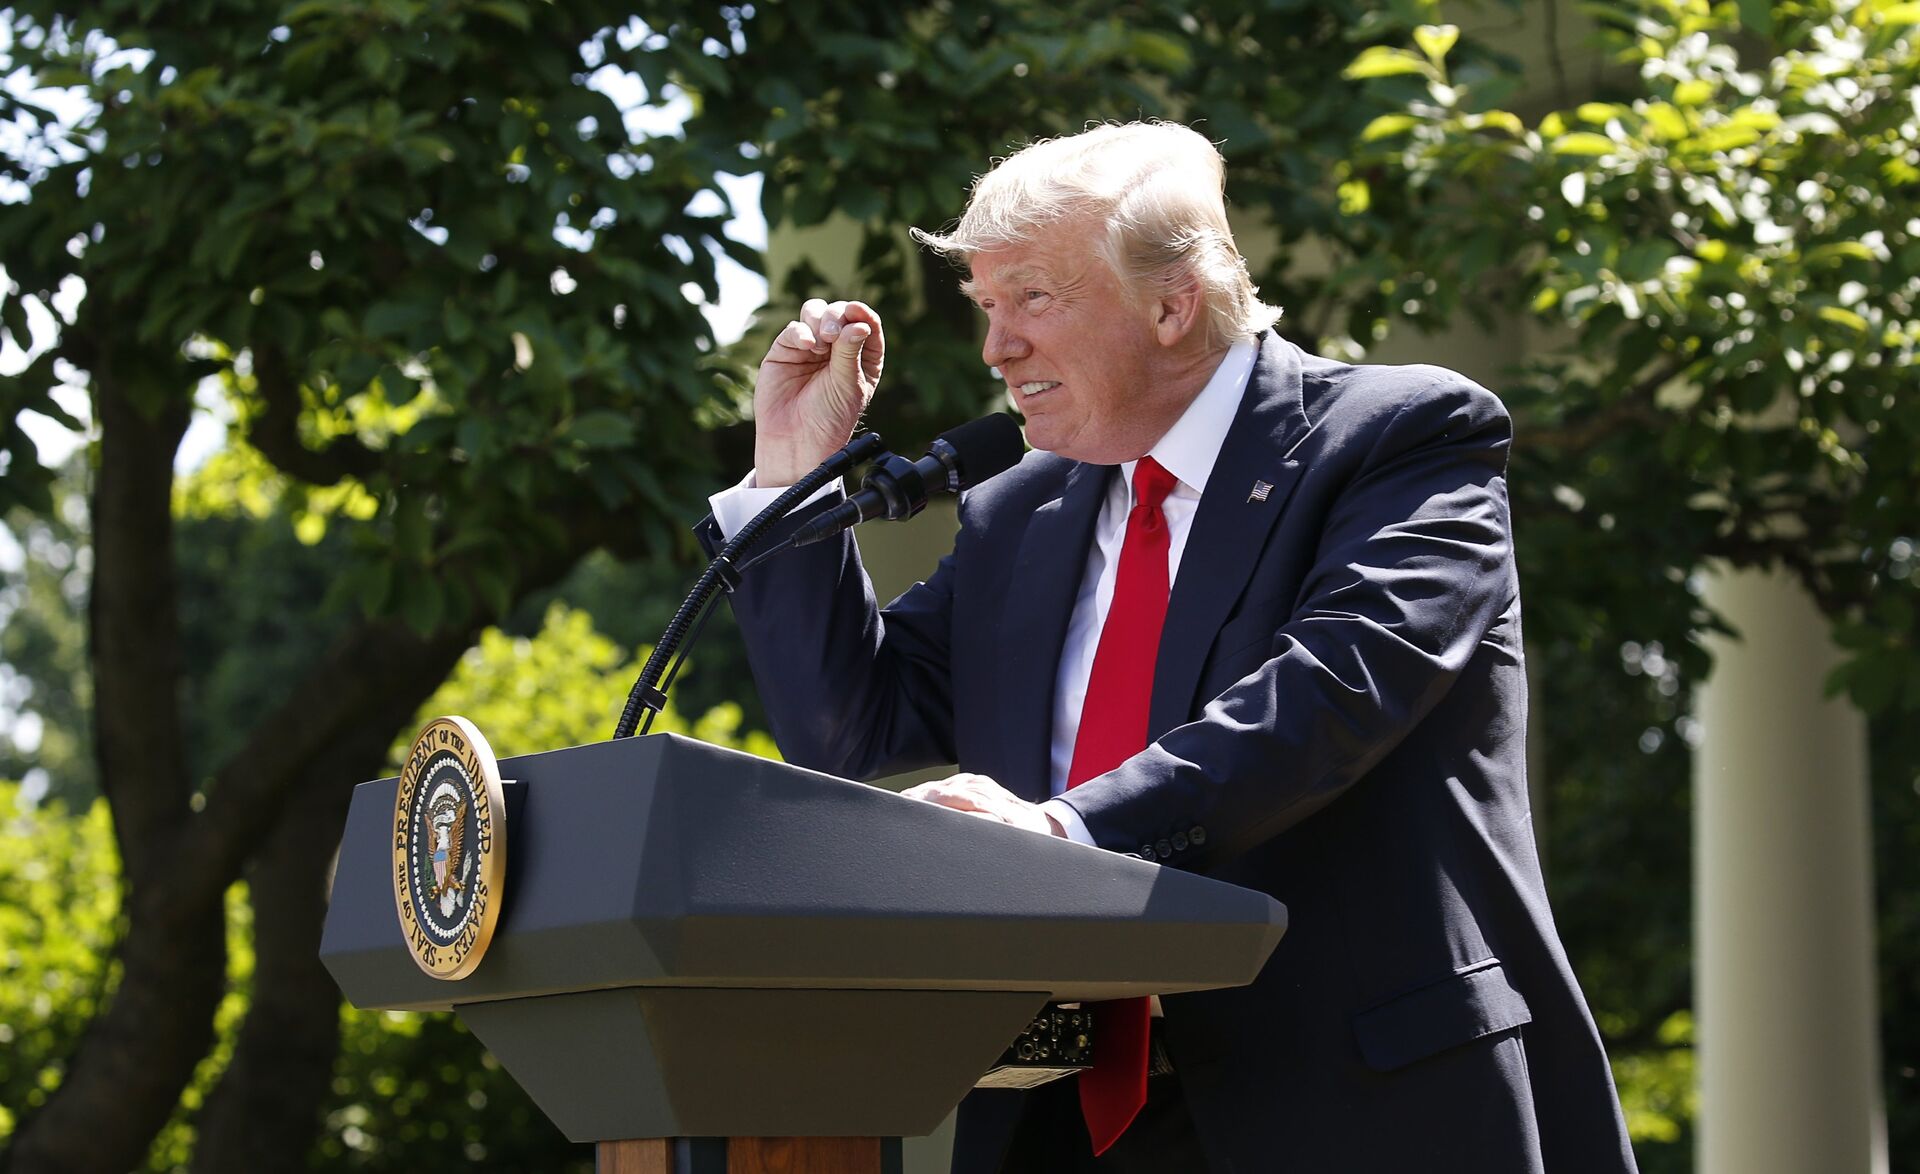 US President Donald Trump refers to amounts of temperature change as he announces his decision that the United States will withdraw from the landmark Paris Climate Agreement, in the Rose Garden of the White House in Washington, US, June 1, 2017. - Sputnik International, 1920, 08.11.2021